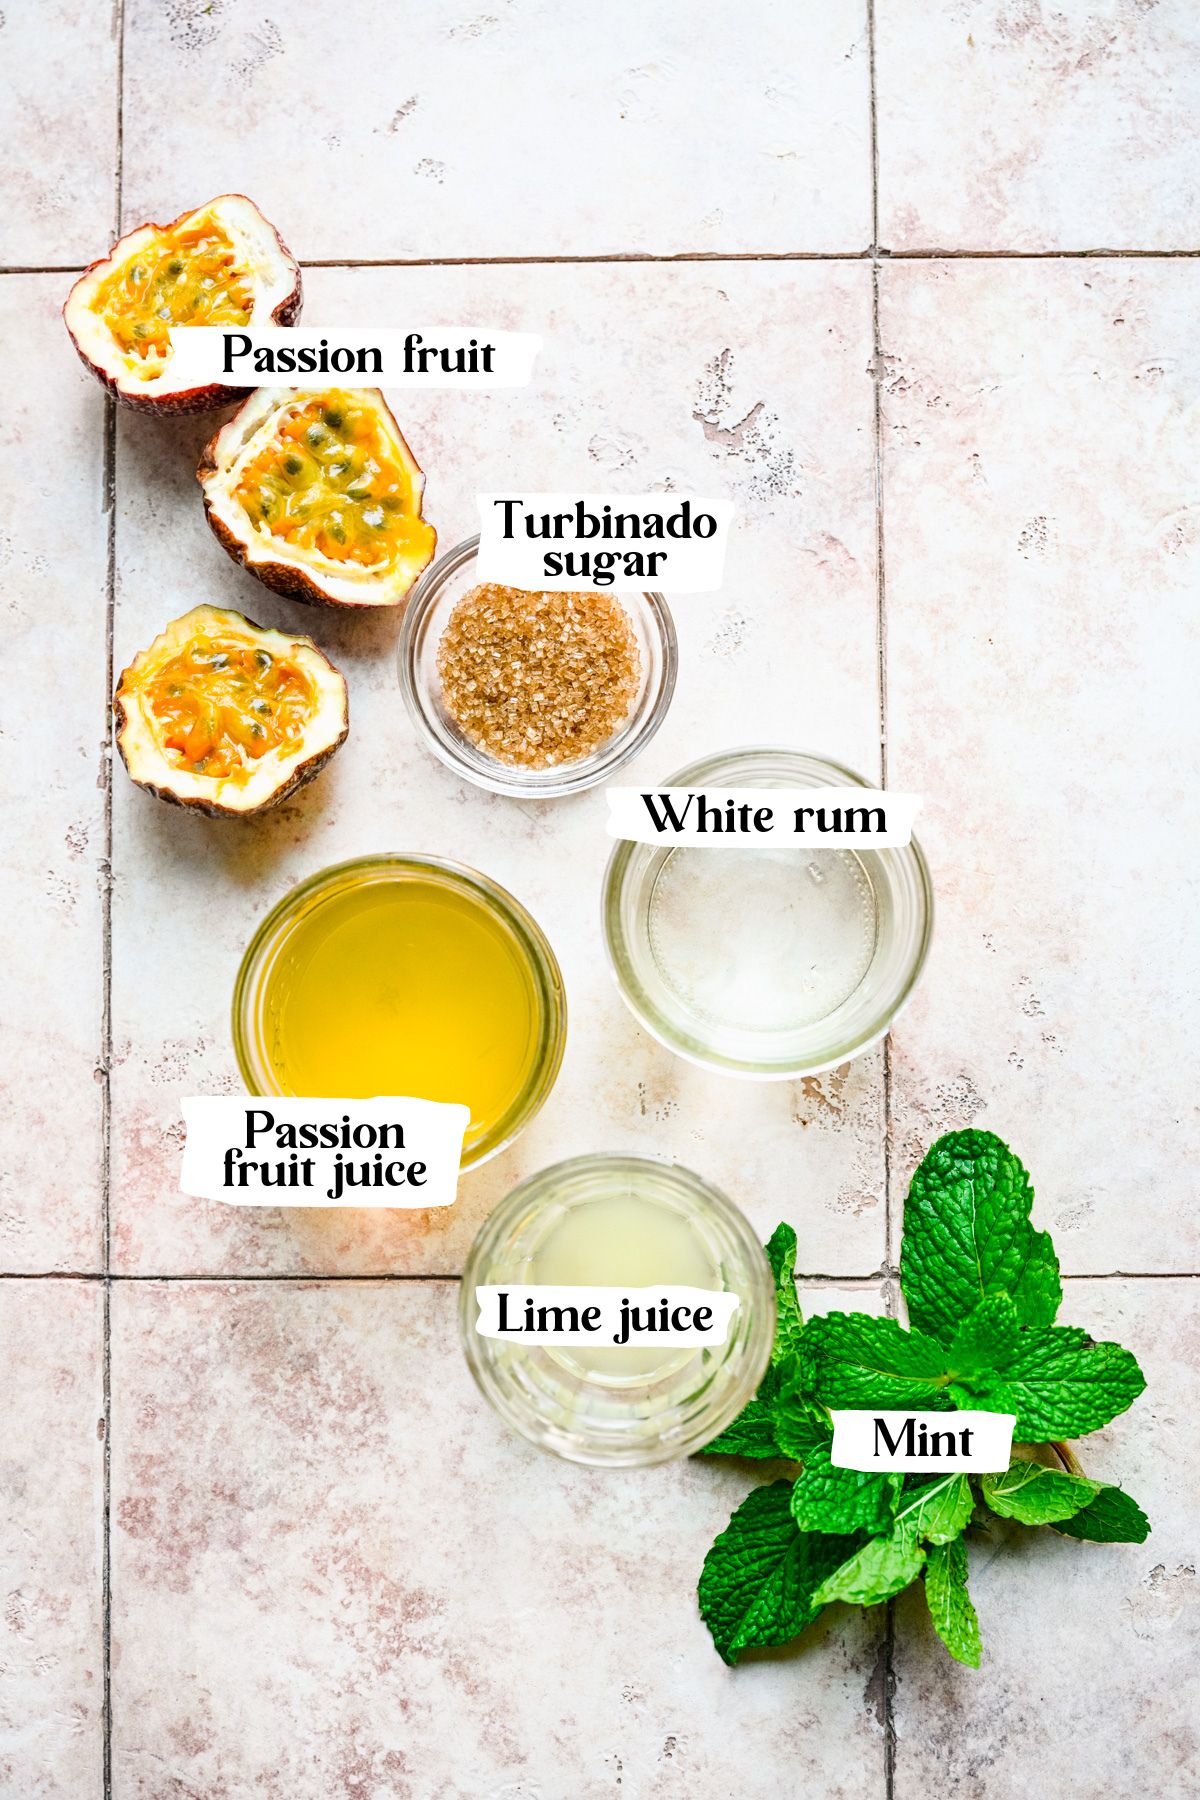 Passion fruit mojito ingredients including mint and lime juice.